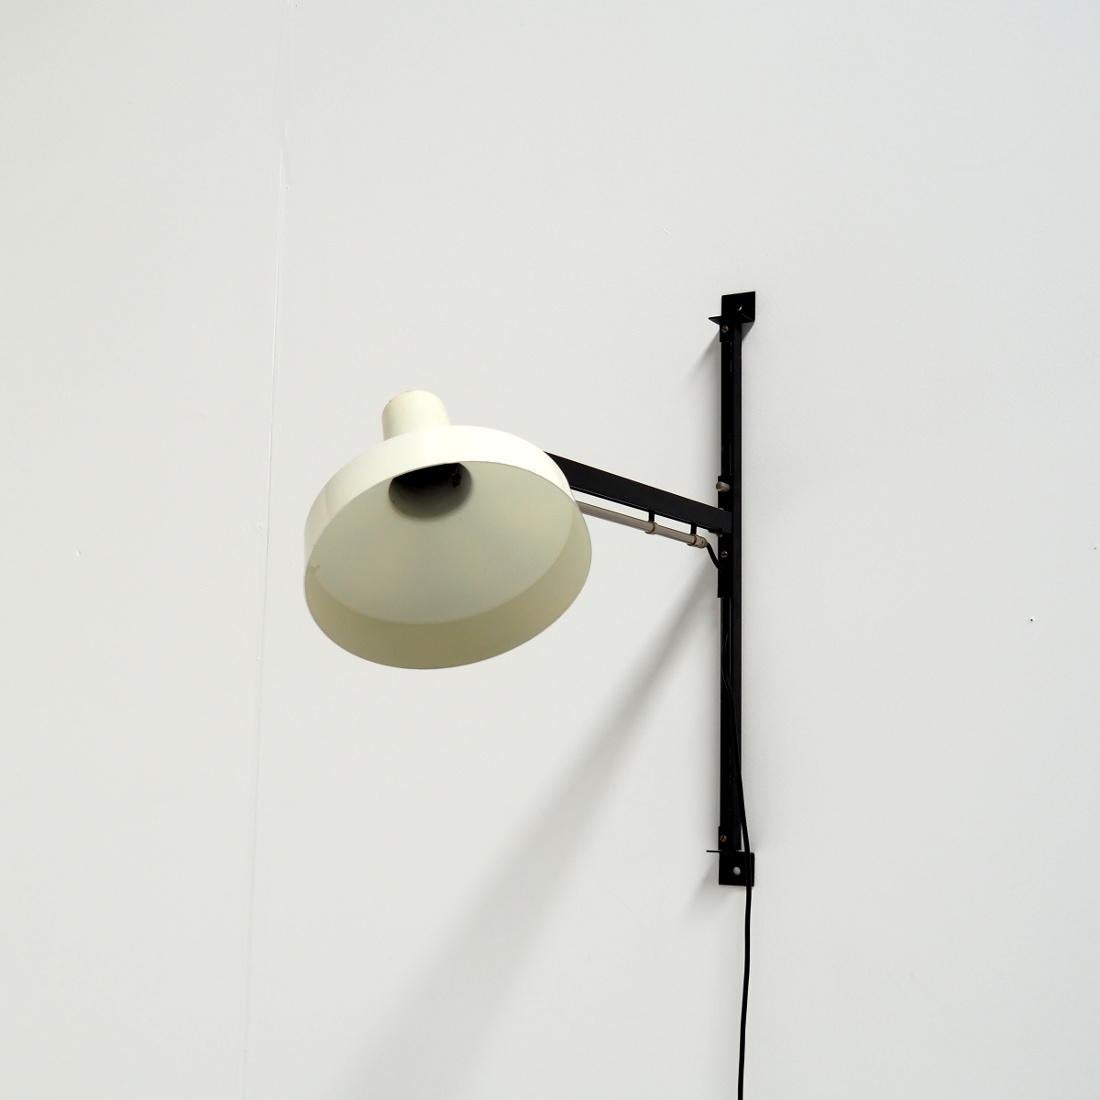 Mid-20th Century Wall Lamp by Niek Hiemstra for Hiemstra Evolux